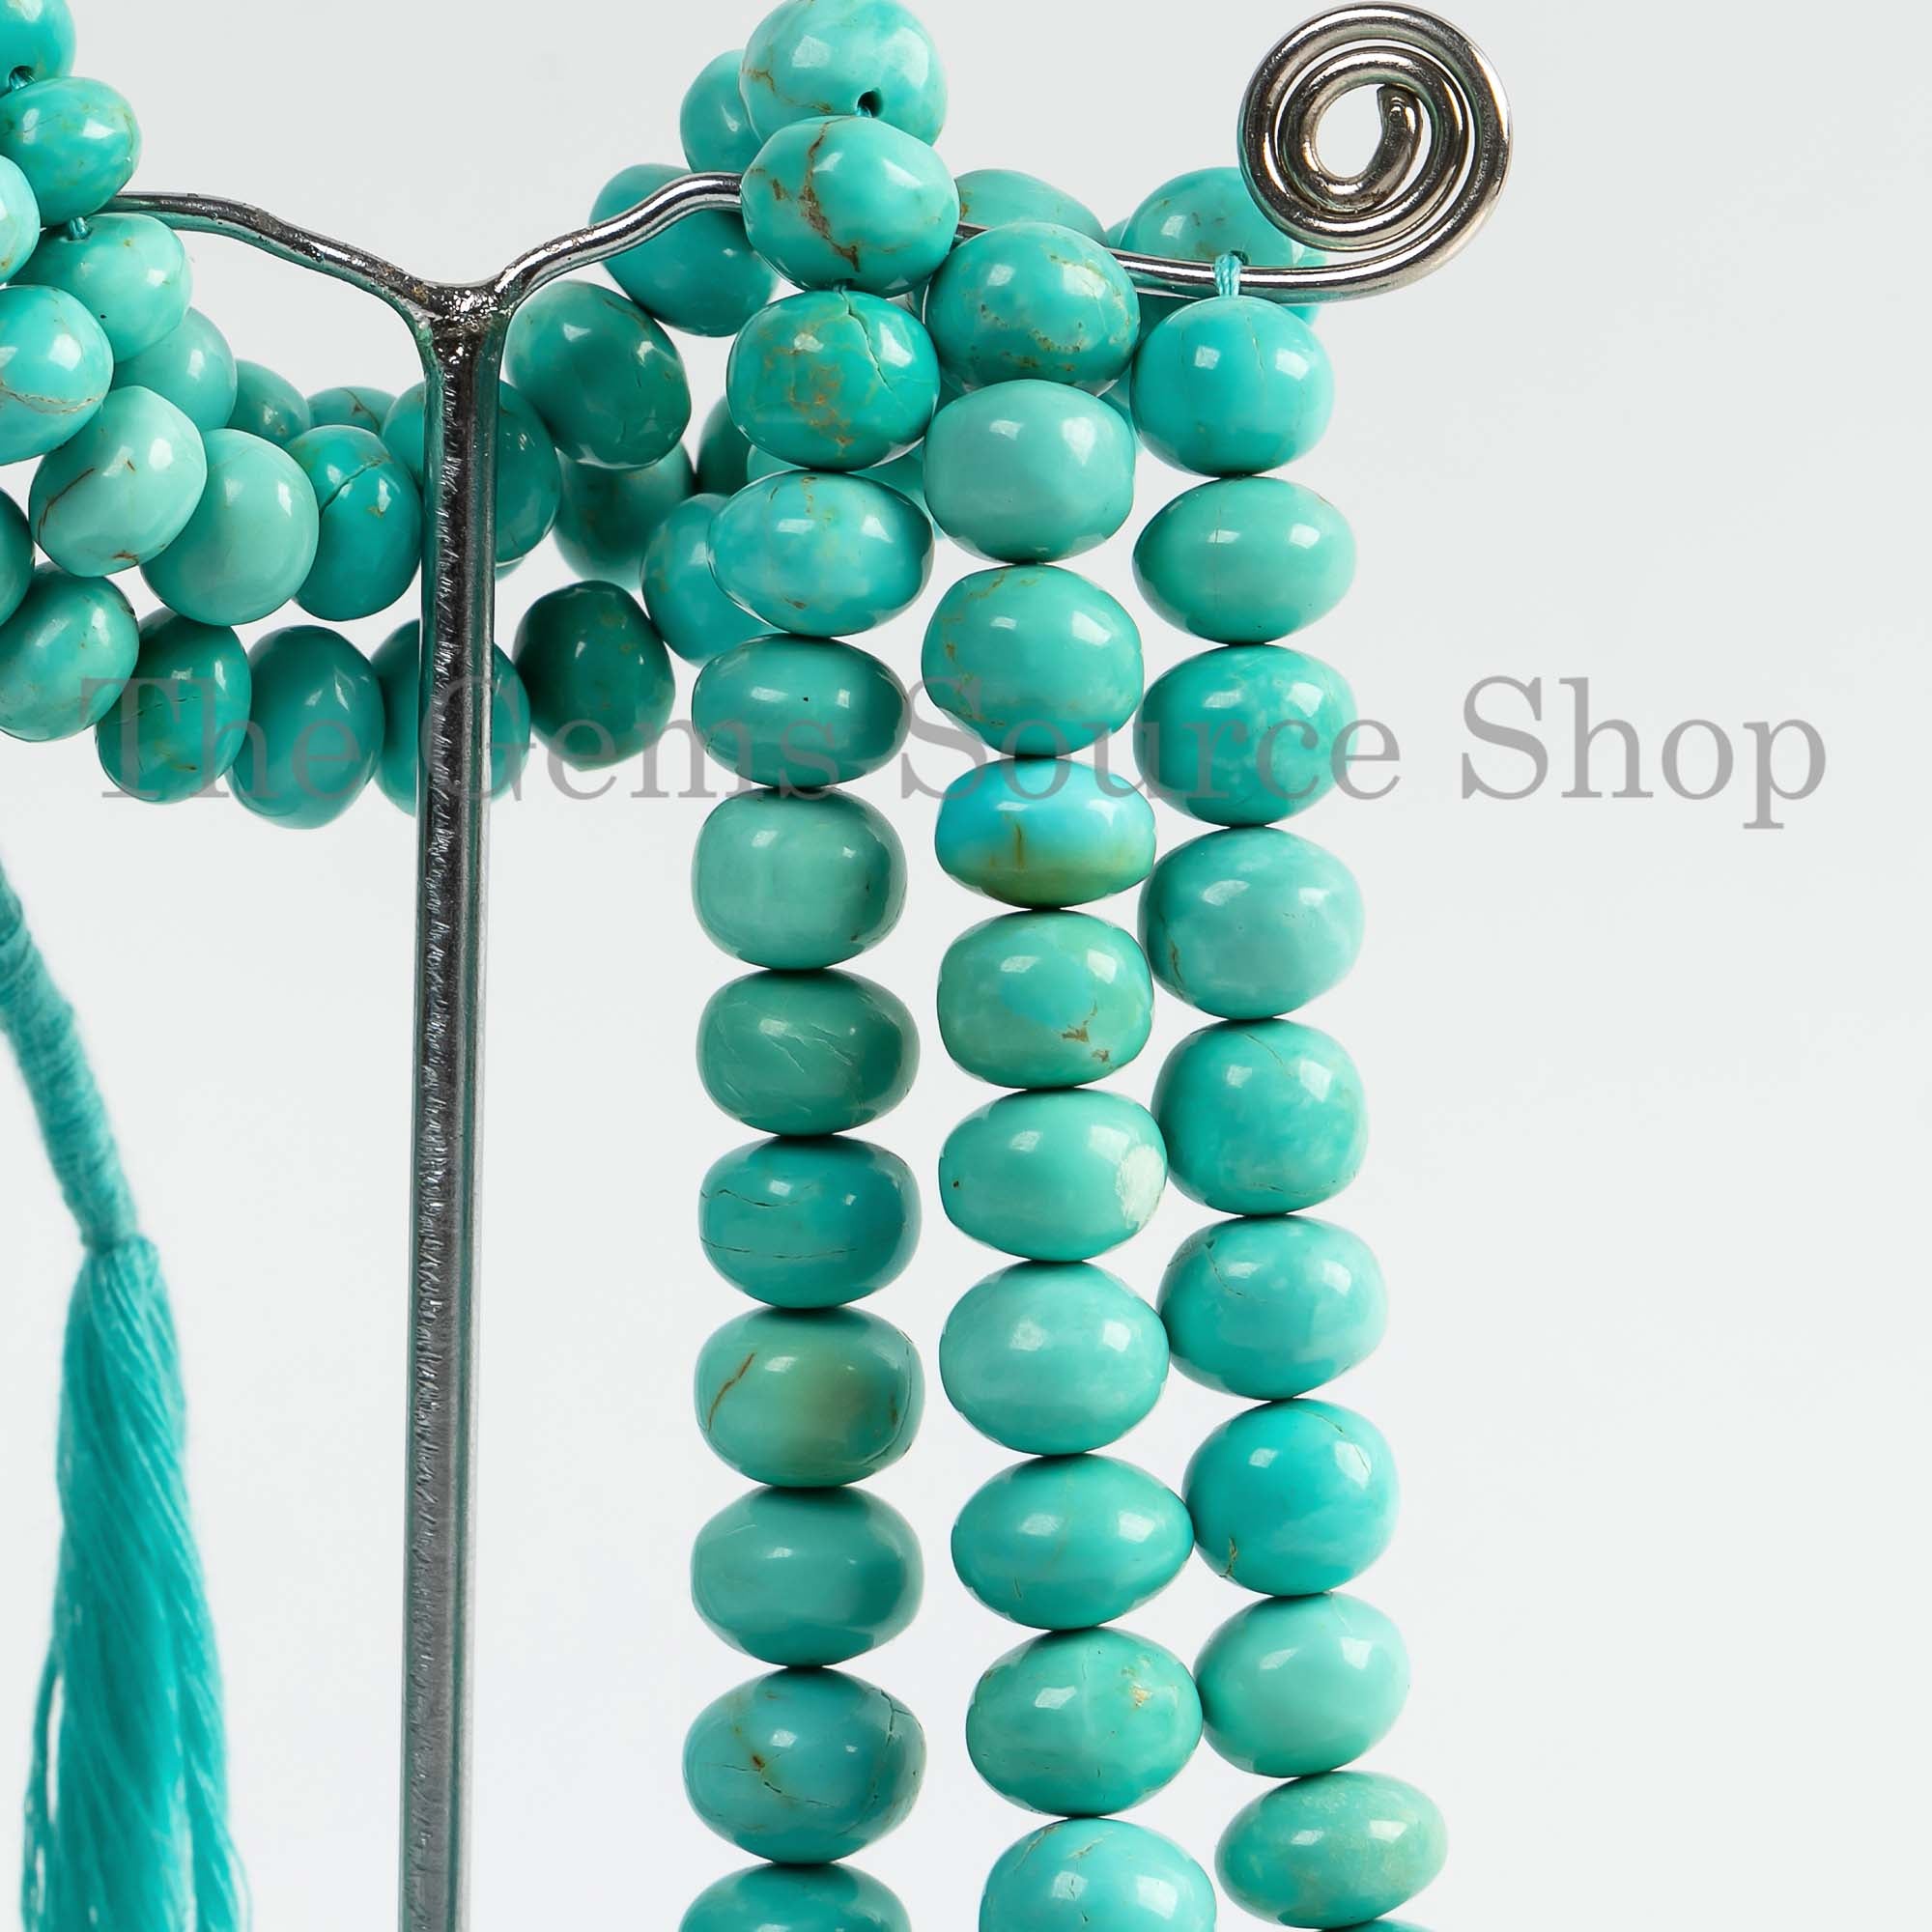 7.5-13mm Turquoise Smooth Rondelle Beads, Loose Turquoise Strand, Turquoise Beads For Jewelry